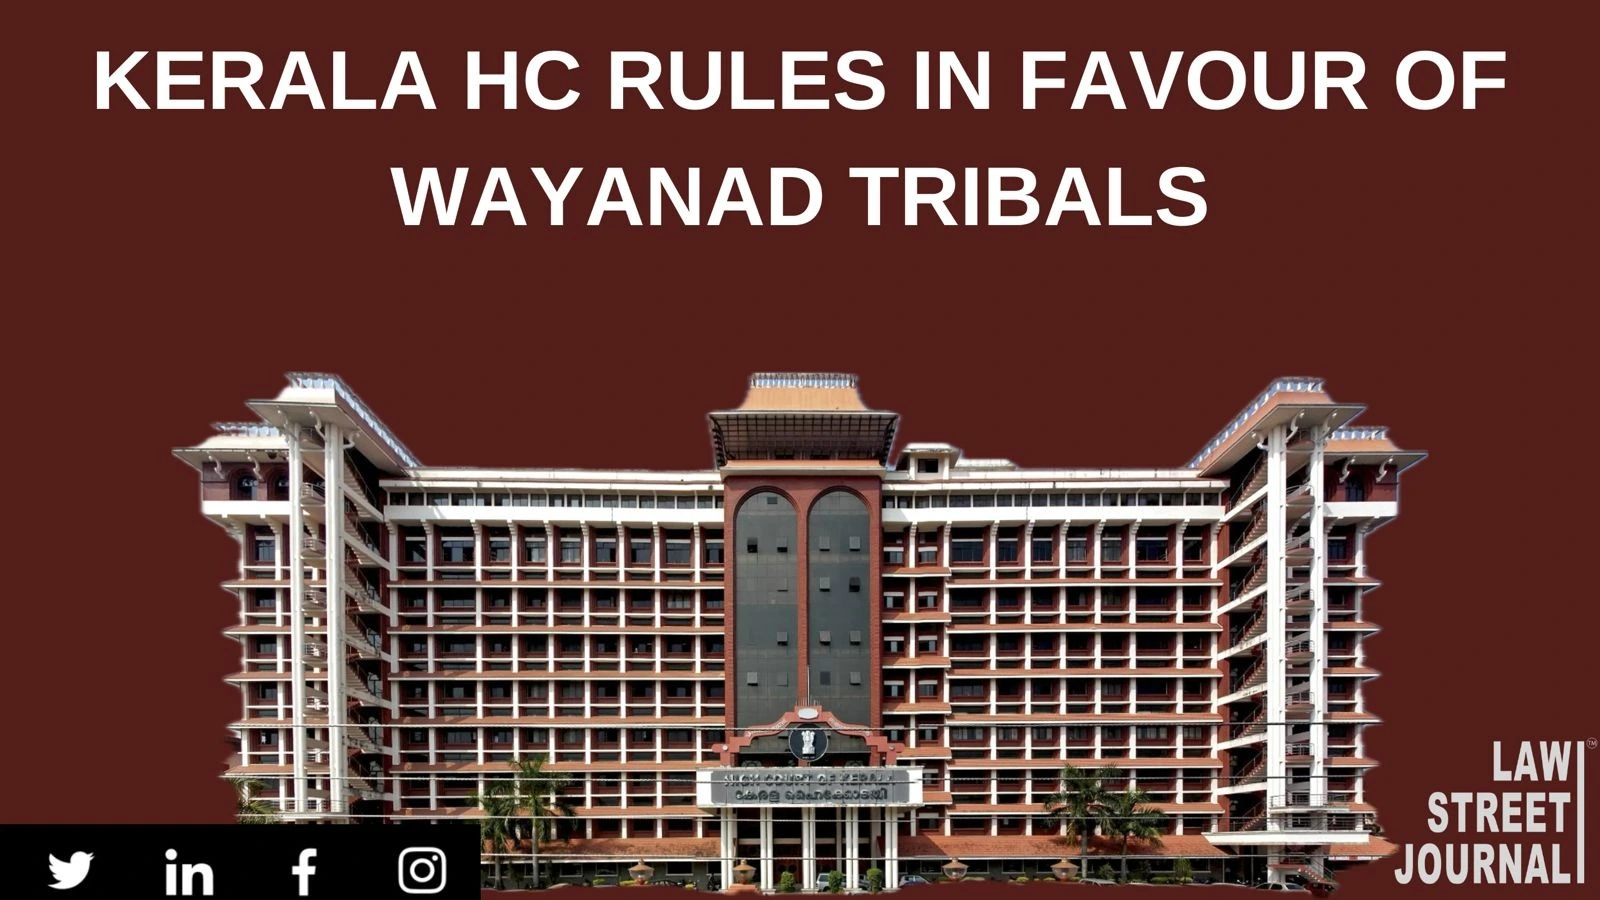 ‘Piercing knife at hearts of innocent tribals in Wayanad’: Kerala HC quashes assignment of govt land at ₹100 per acre [Read Judgment]